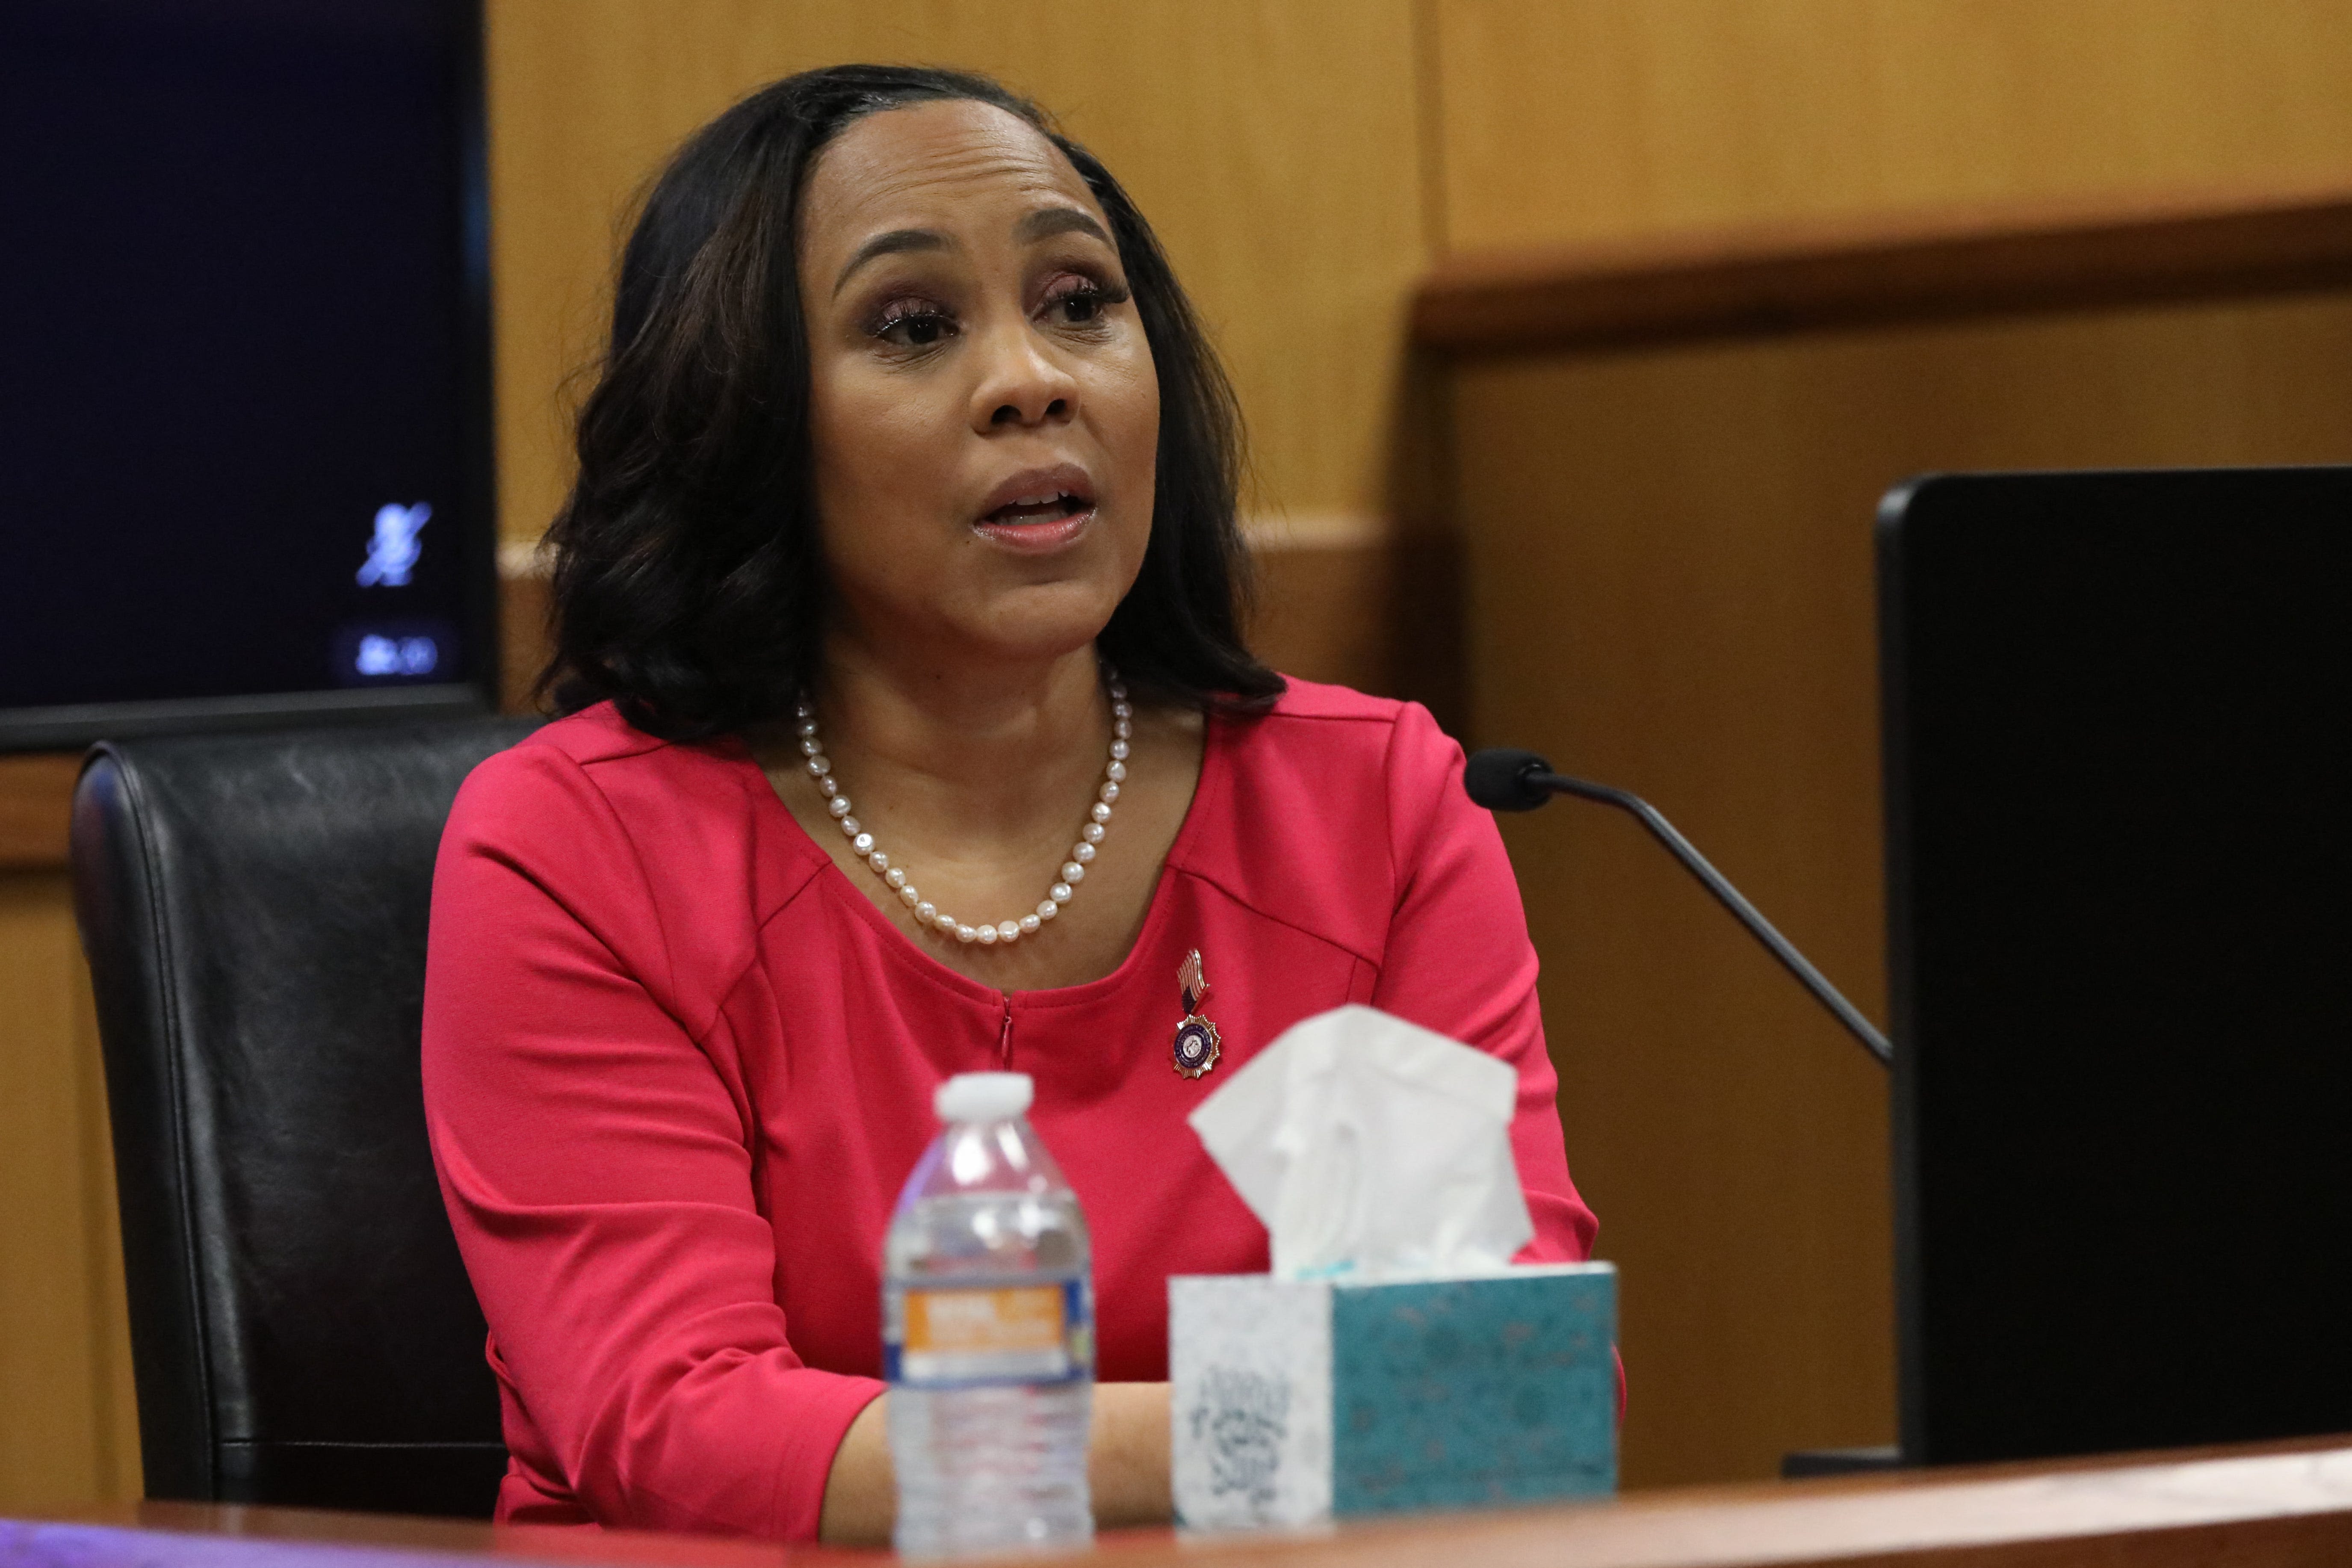 Fulton County DA Fani Willis urges voters to polls as she faces primary election challenge